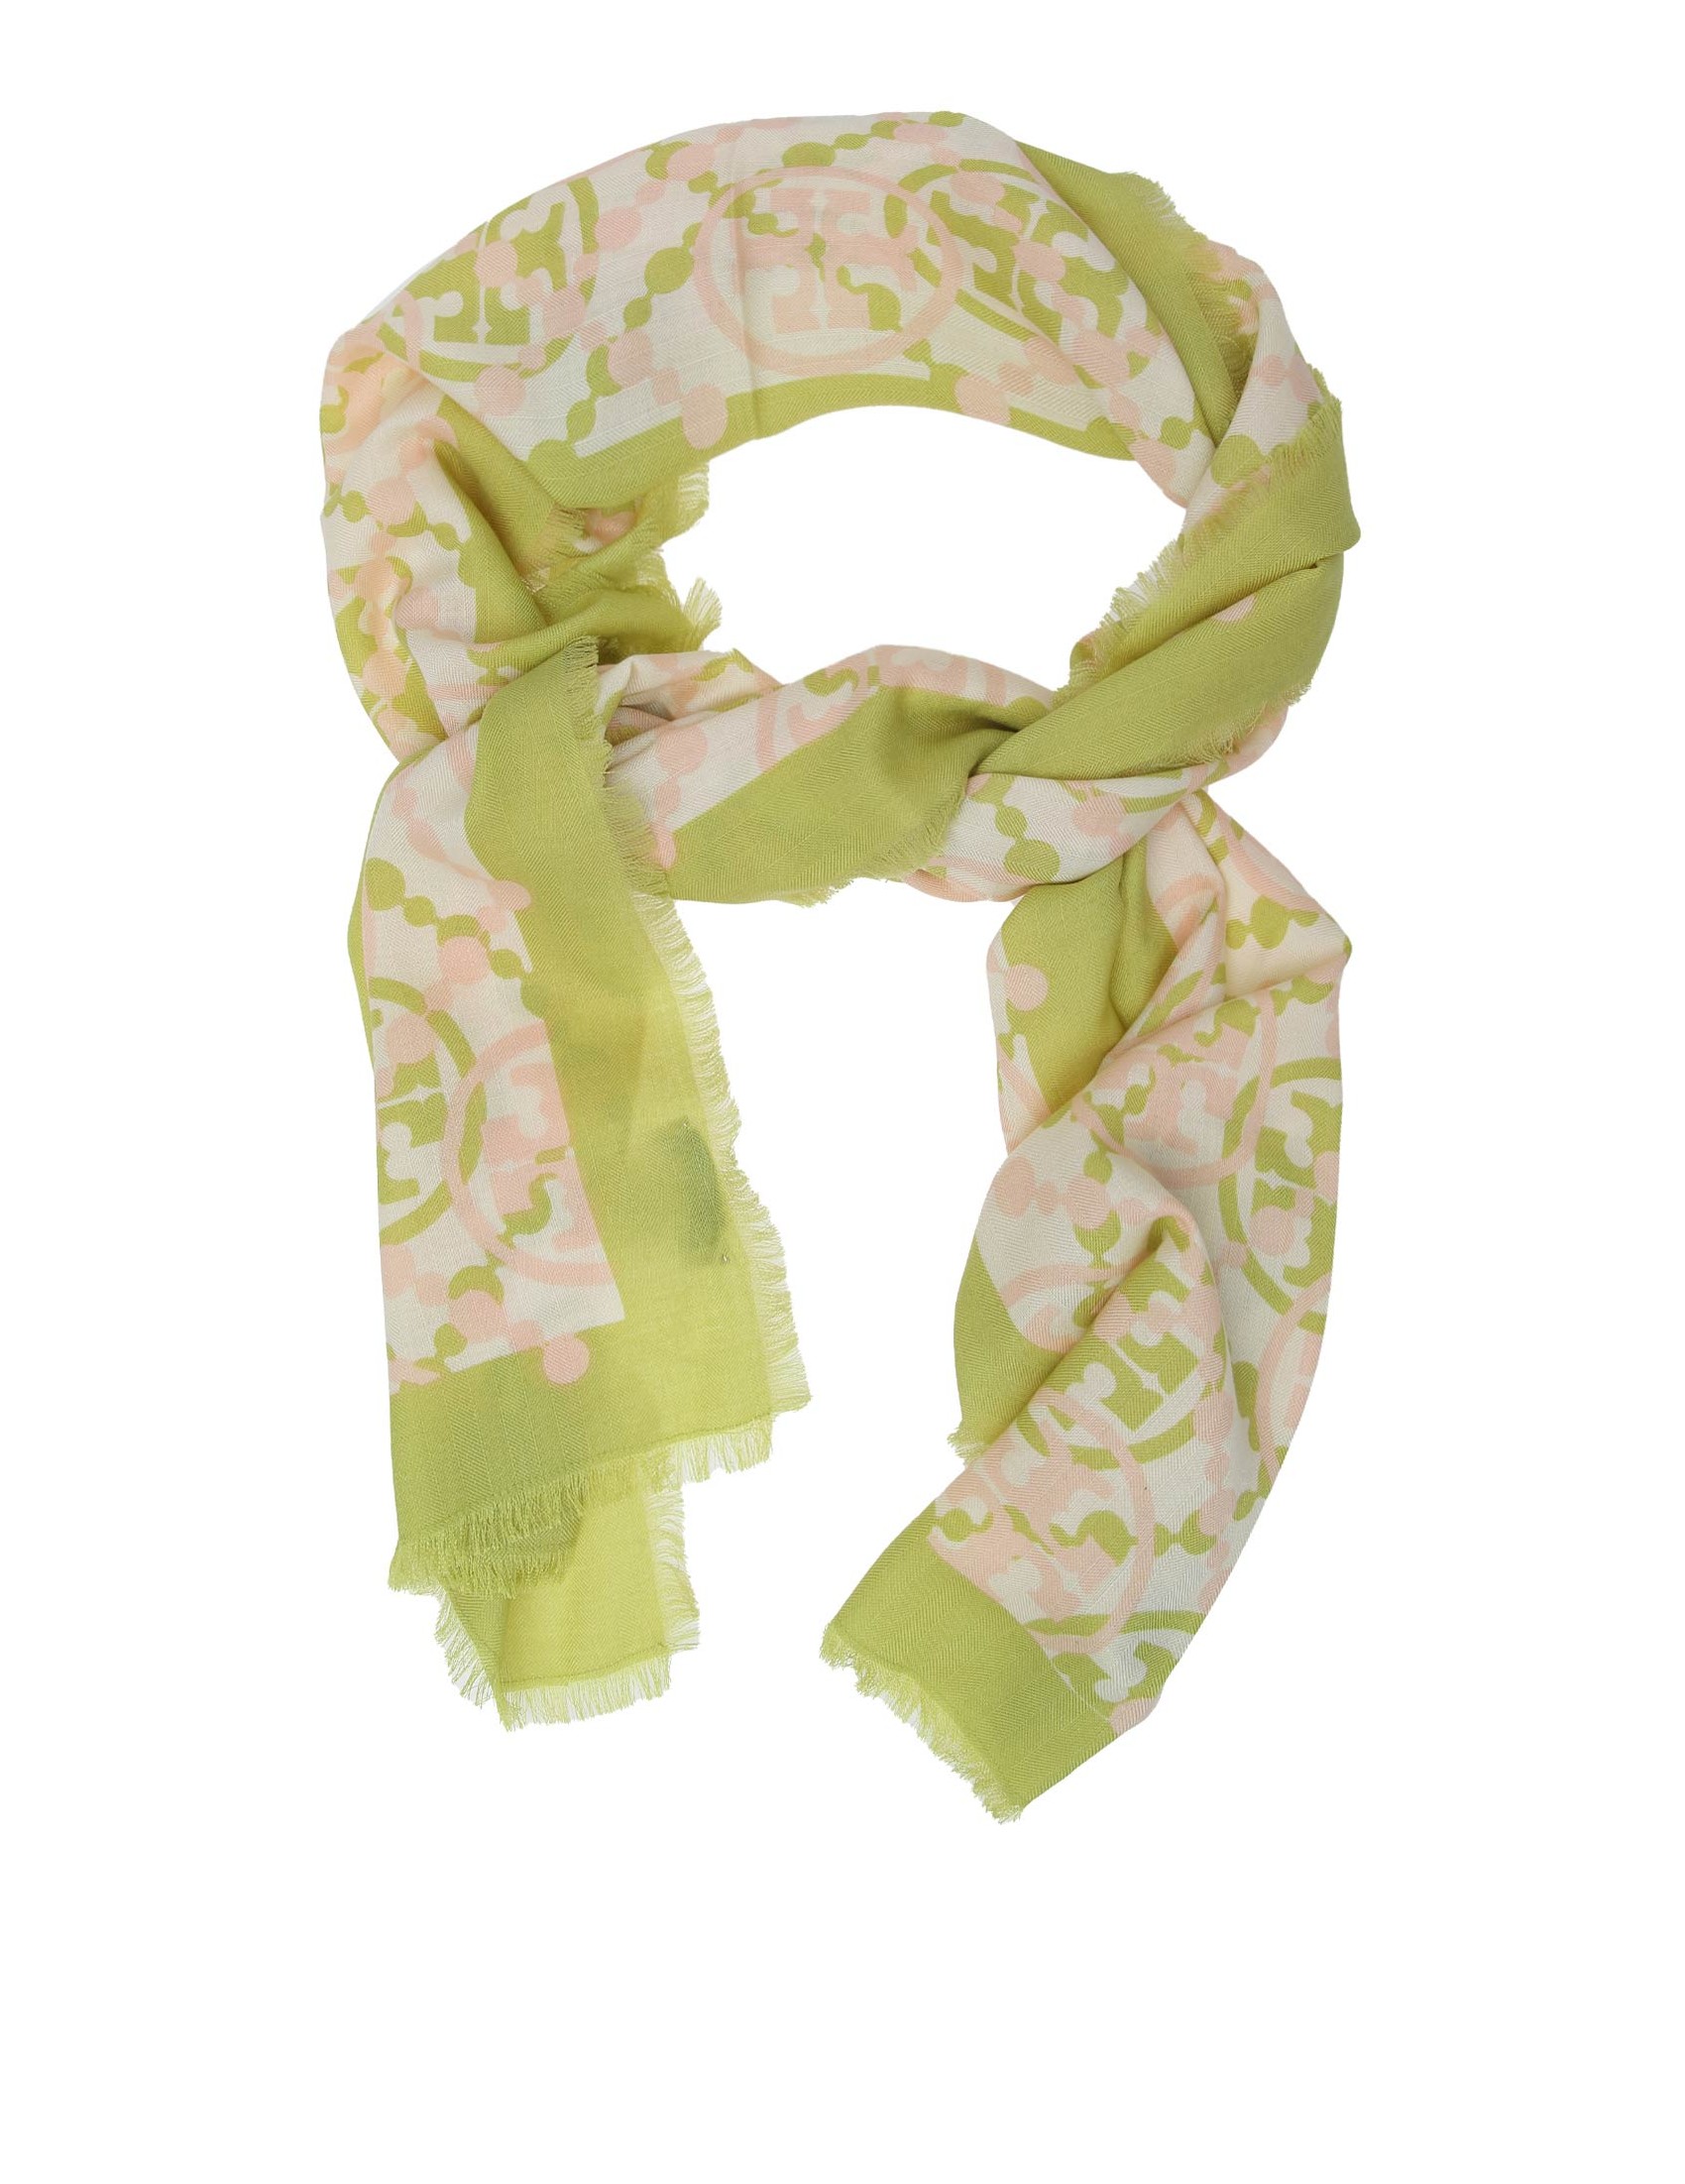 TORY BURCH MONOGRAM DOUBLE T SCARF